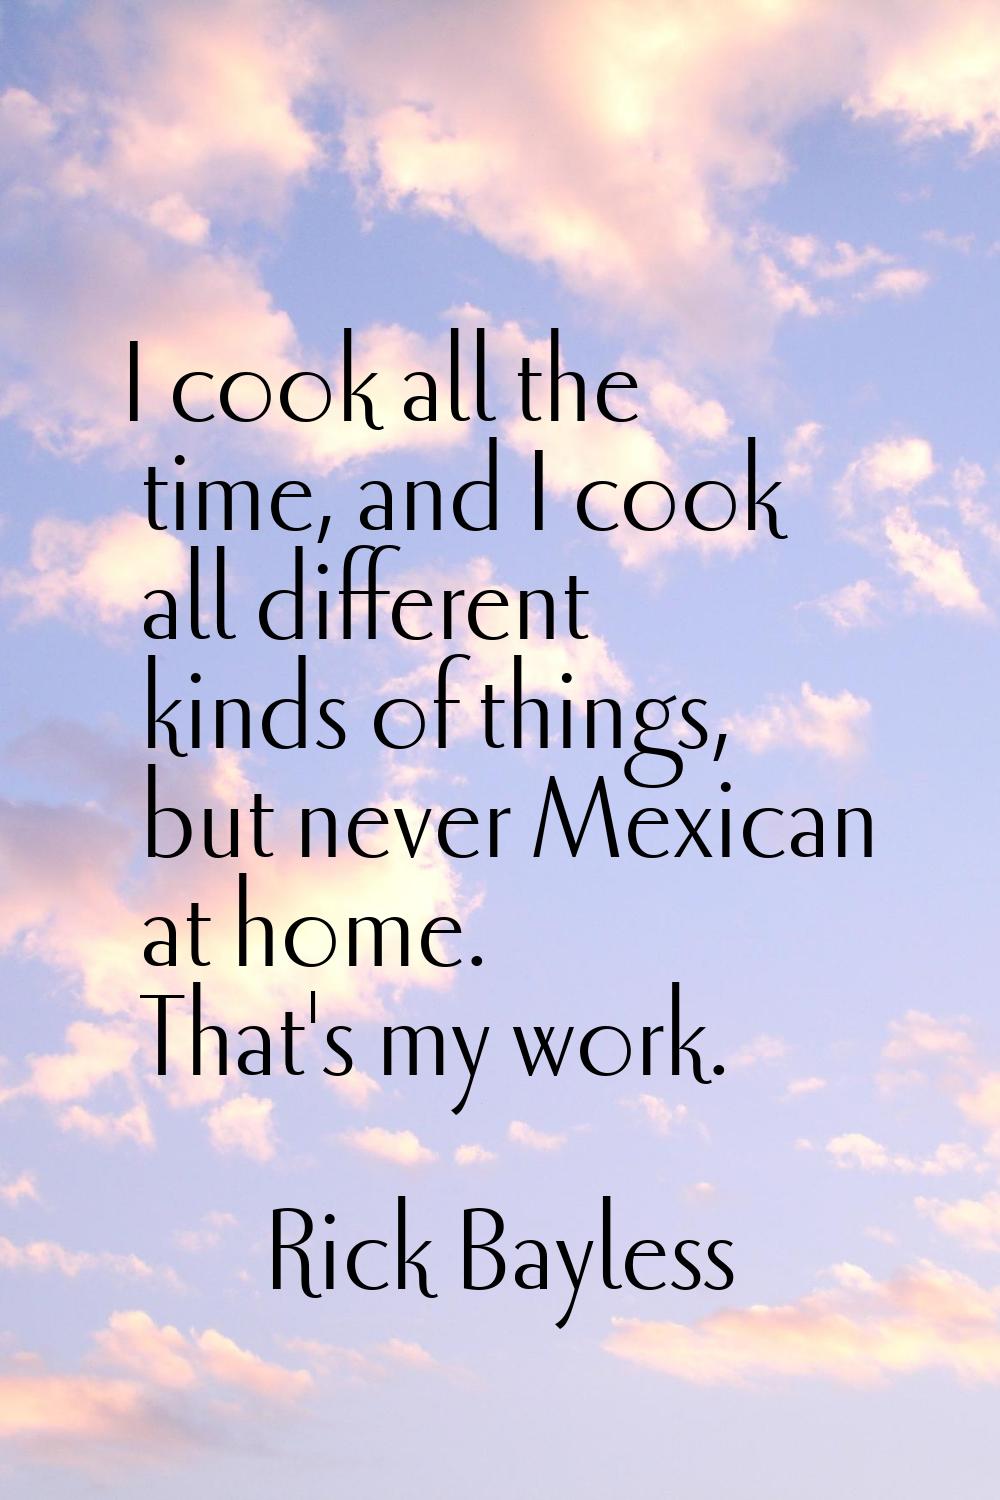 I cook all the time, and I cook all different kinds of things, but never Mexican at home. That's my